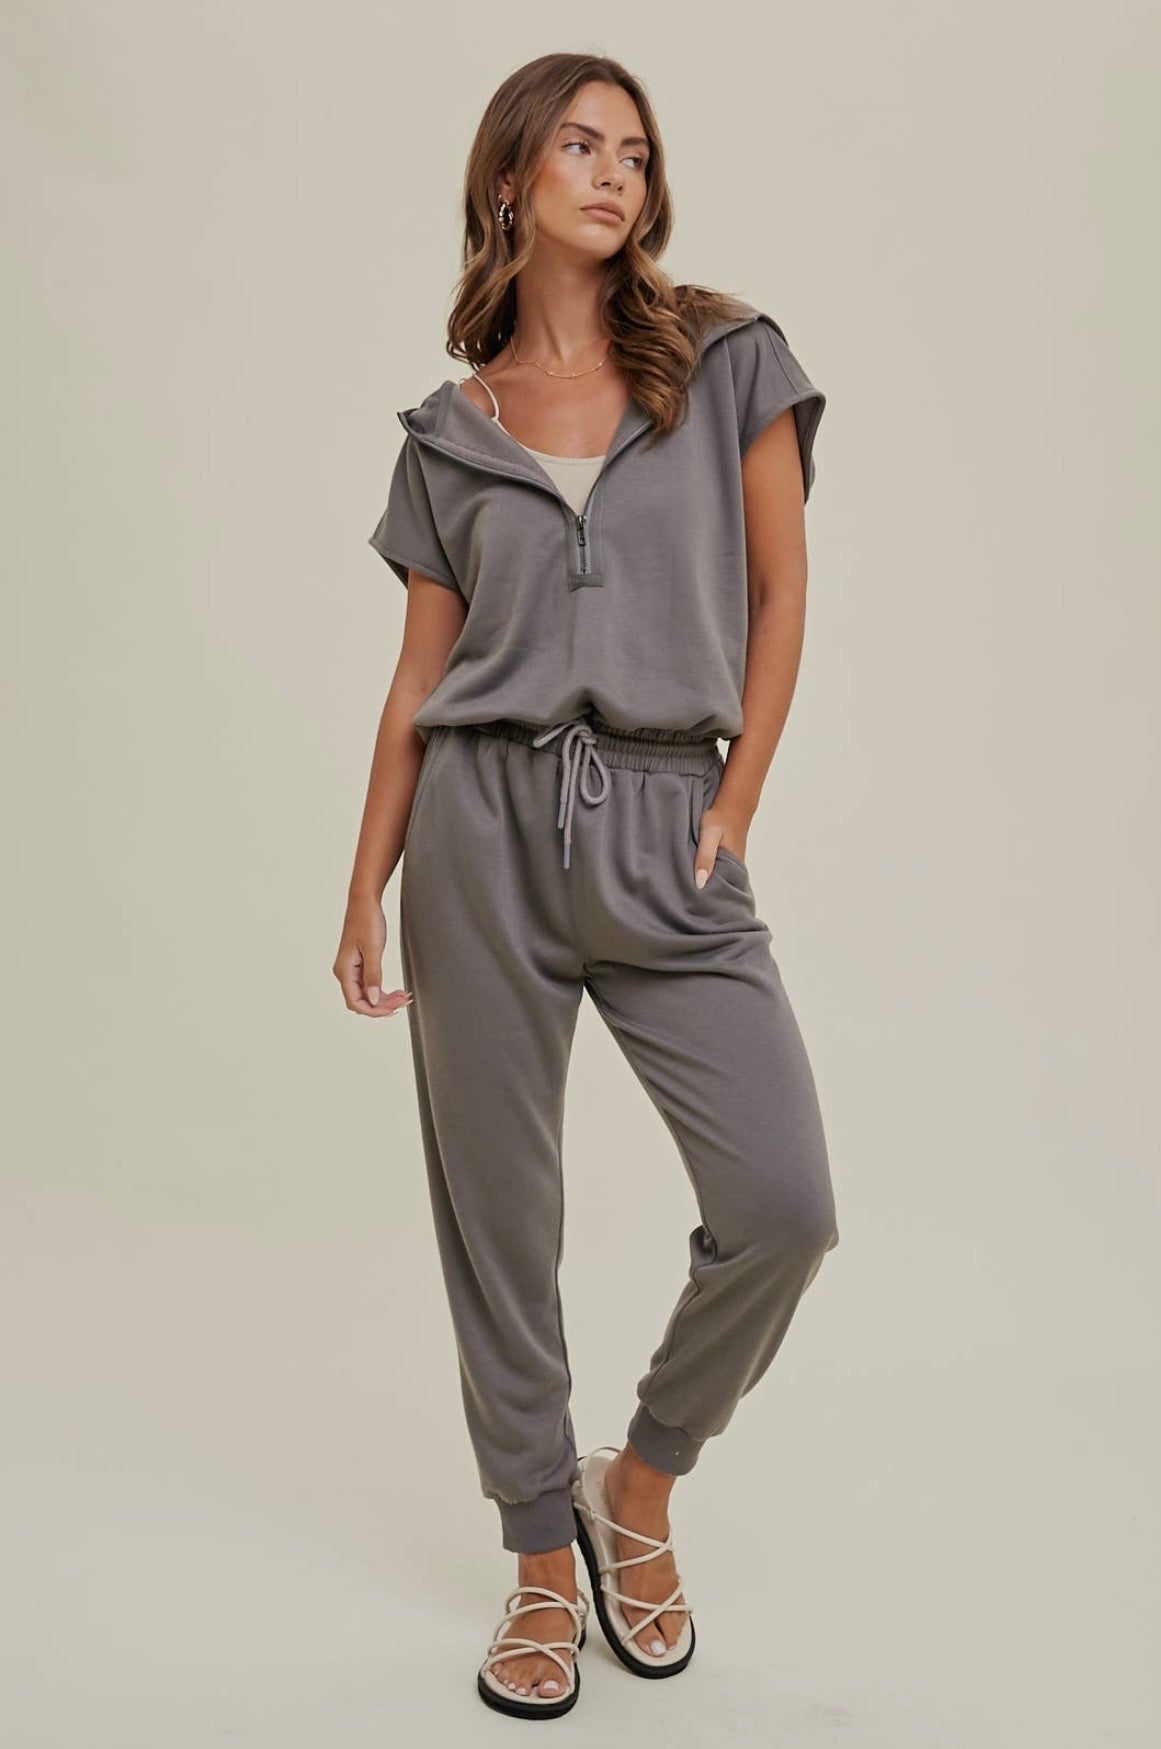 French Terry hooded jumpsuit by Wishlist Apparel - charcoal - Blue Sky Fashions & Lingerie